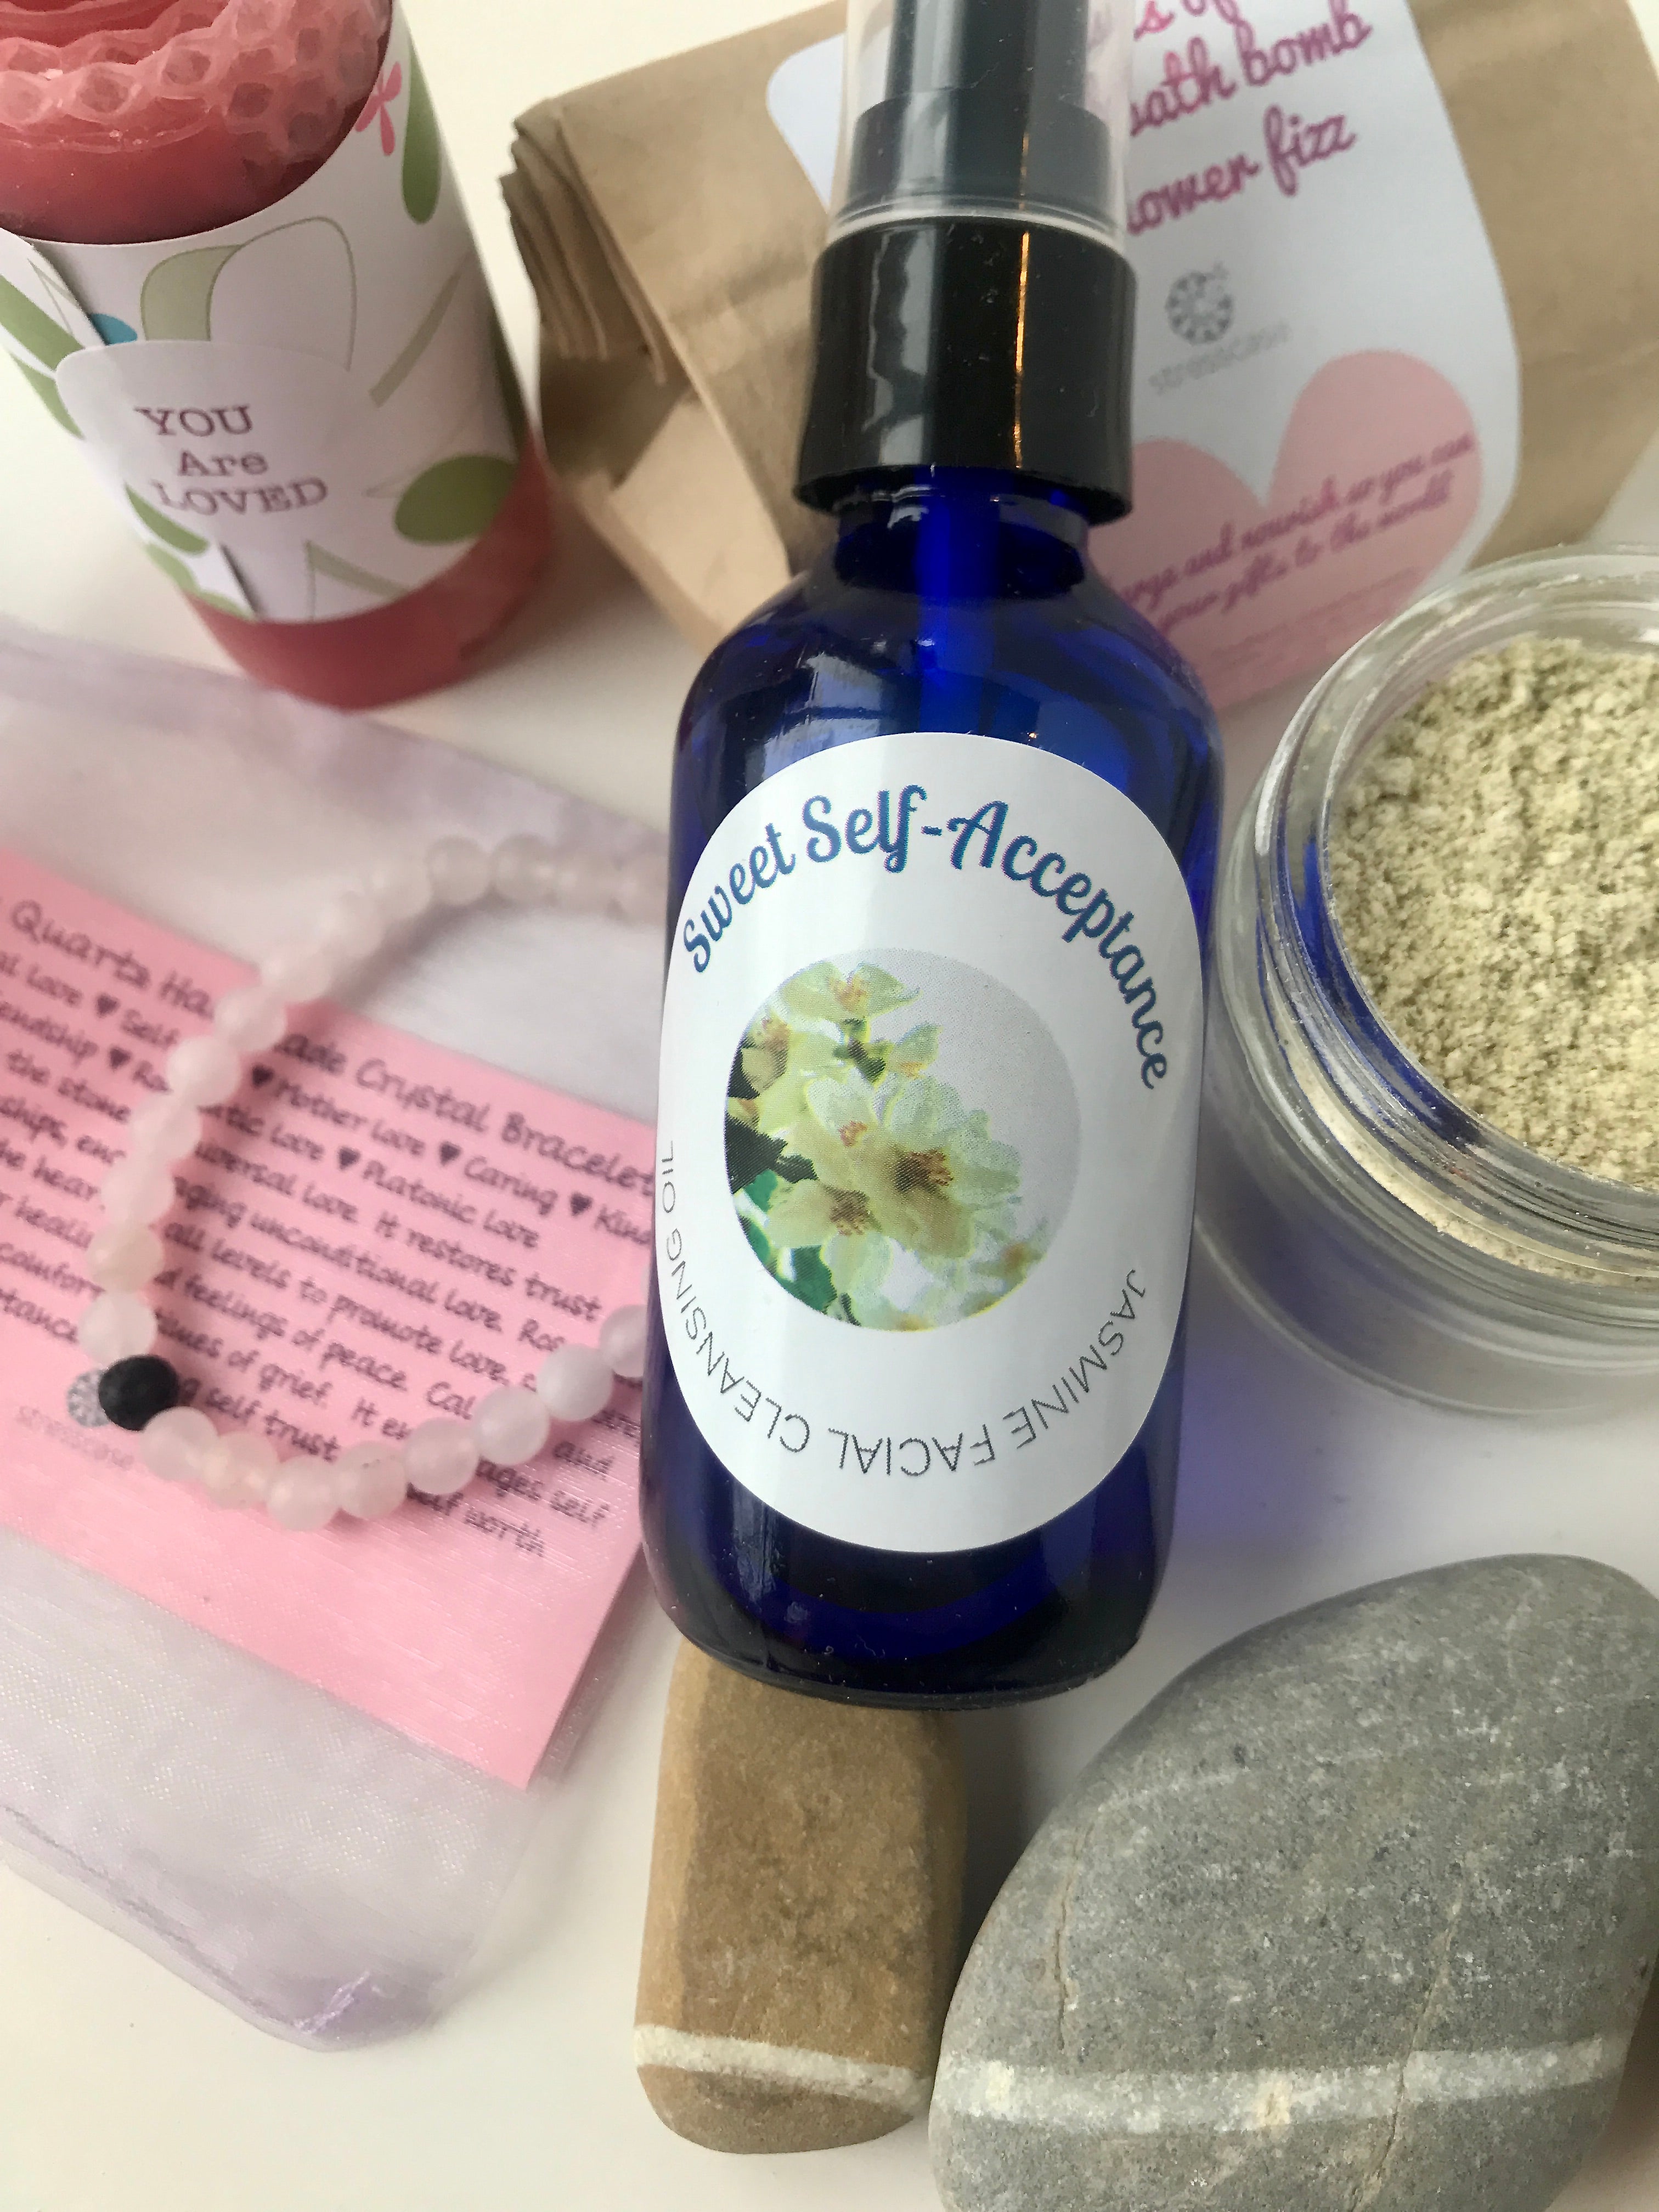 This facial oil is all natural and cruelty-free, hand made in small batches by Stresscase.  Recommended for sensitive skin.  Works as a make up remover and a quick cleanse method or even the first step in a two-step cleansing method. Very lightly fragranced with Jasmine Essential Oil.